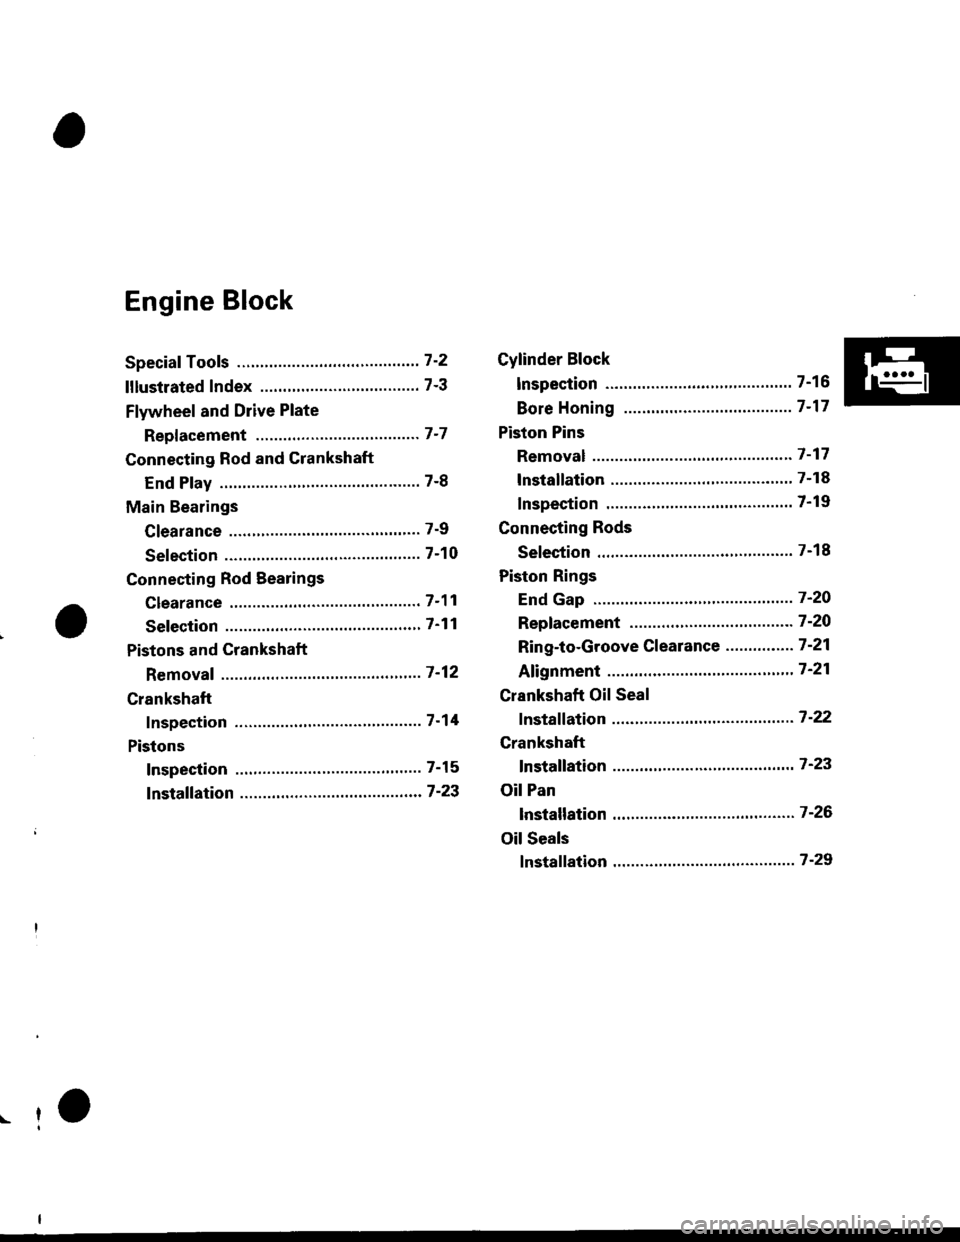 HONDA CIVIC 1999 6.G Service Manual Engine Block
Speciaf Tools ..........." 7-2
lllustlated Index ...................."............ 7-3
Flywheel and Drive Plate
Repf acement """. 7-7
Connecting Rod and Crankshaft
End Play ...........